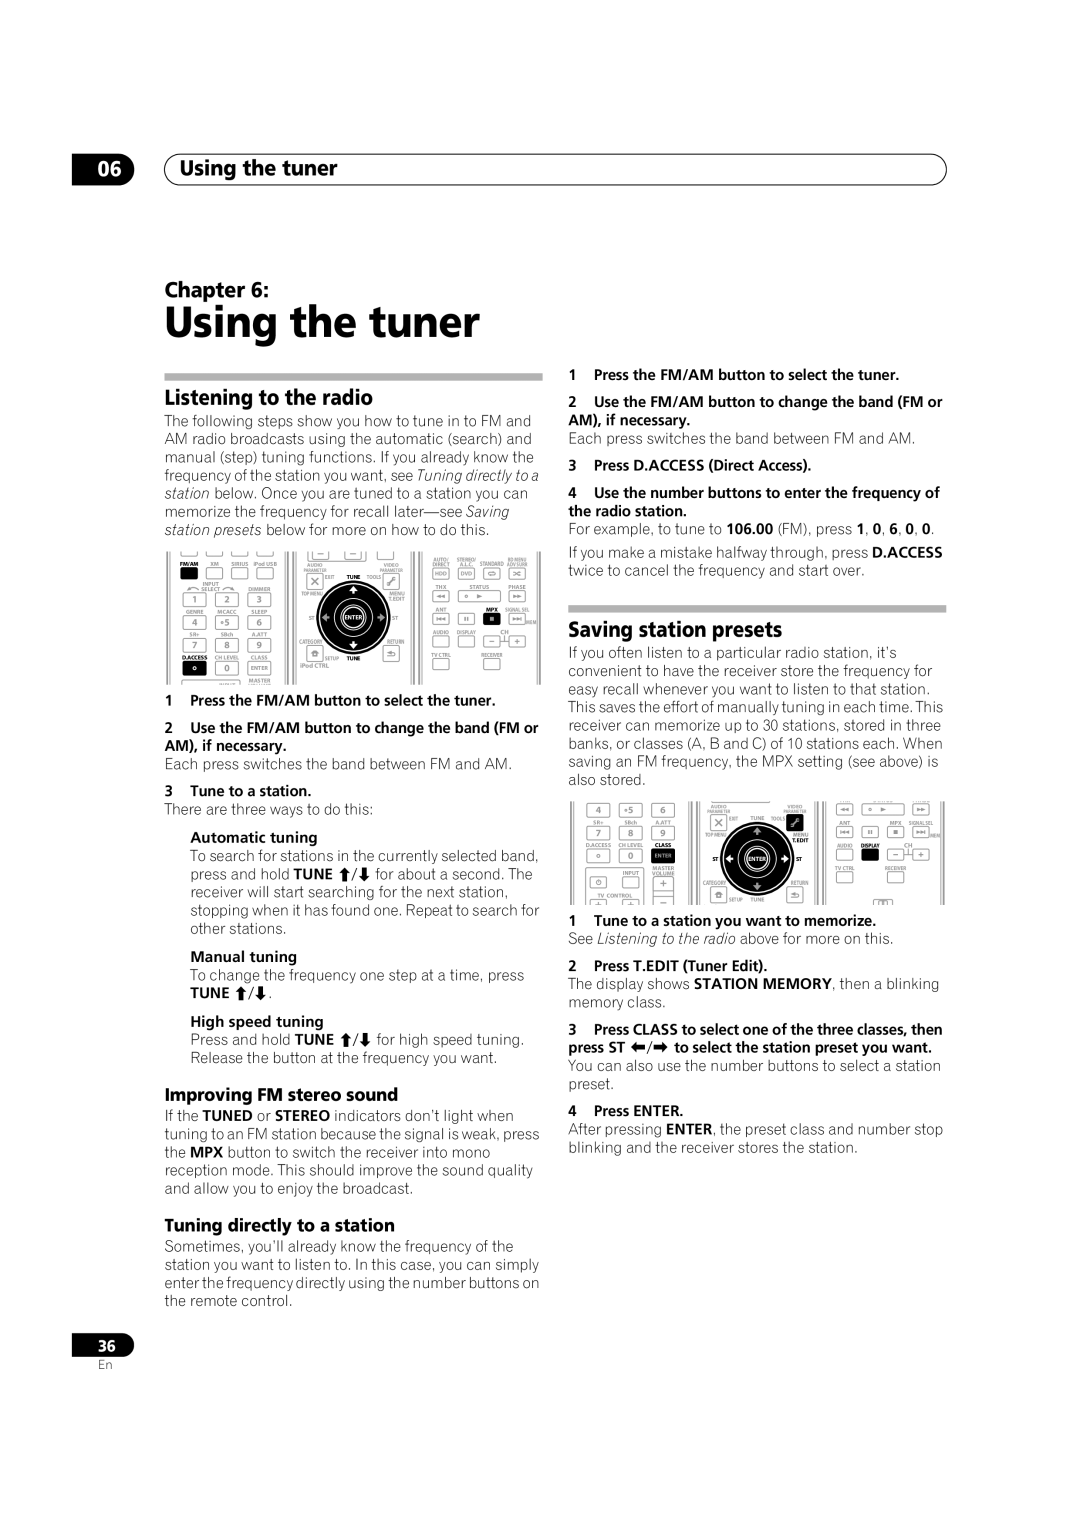 Pioneer VSX-1018AH-K 7 operating instructions 06Using the tuner Chapter, Listening to the radio, Saving station presets 